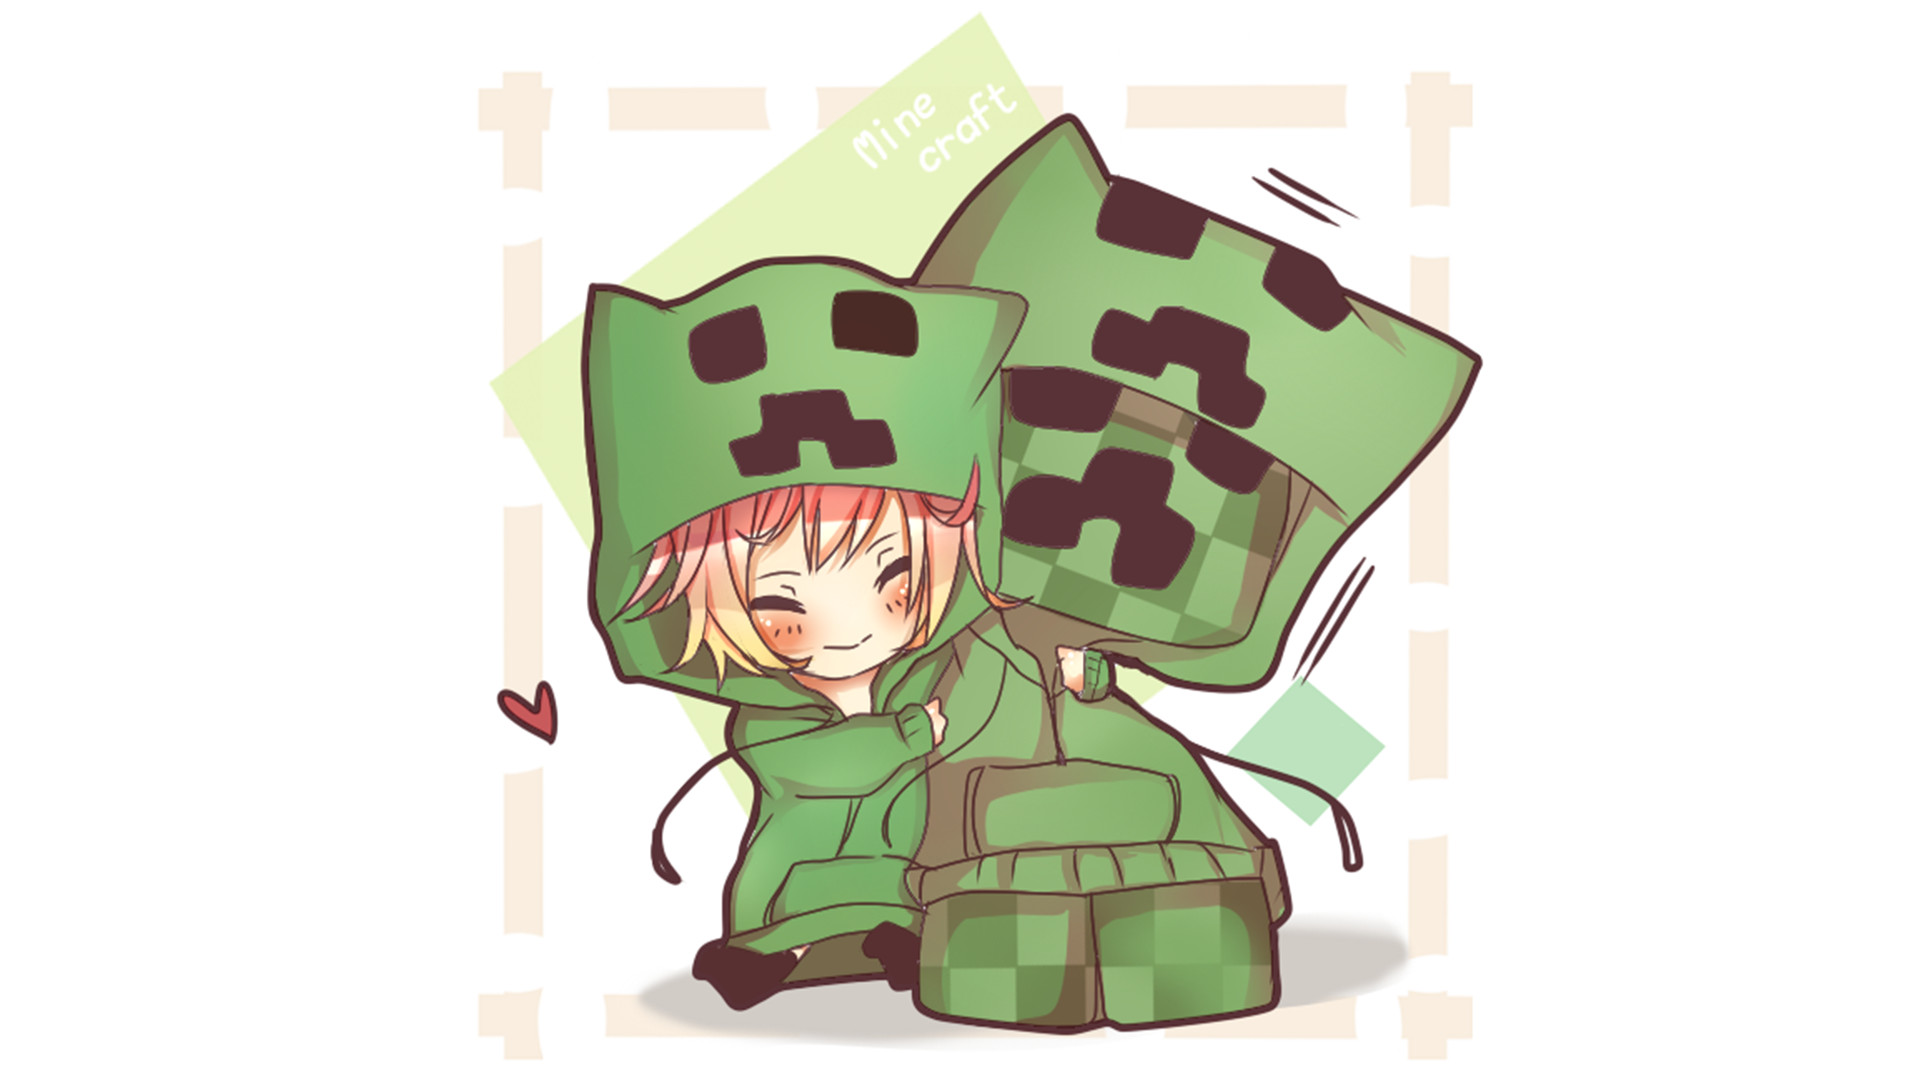 1920x1080 ... Minecraft anime creeper awesome wallpaper ...